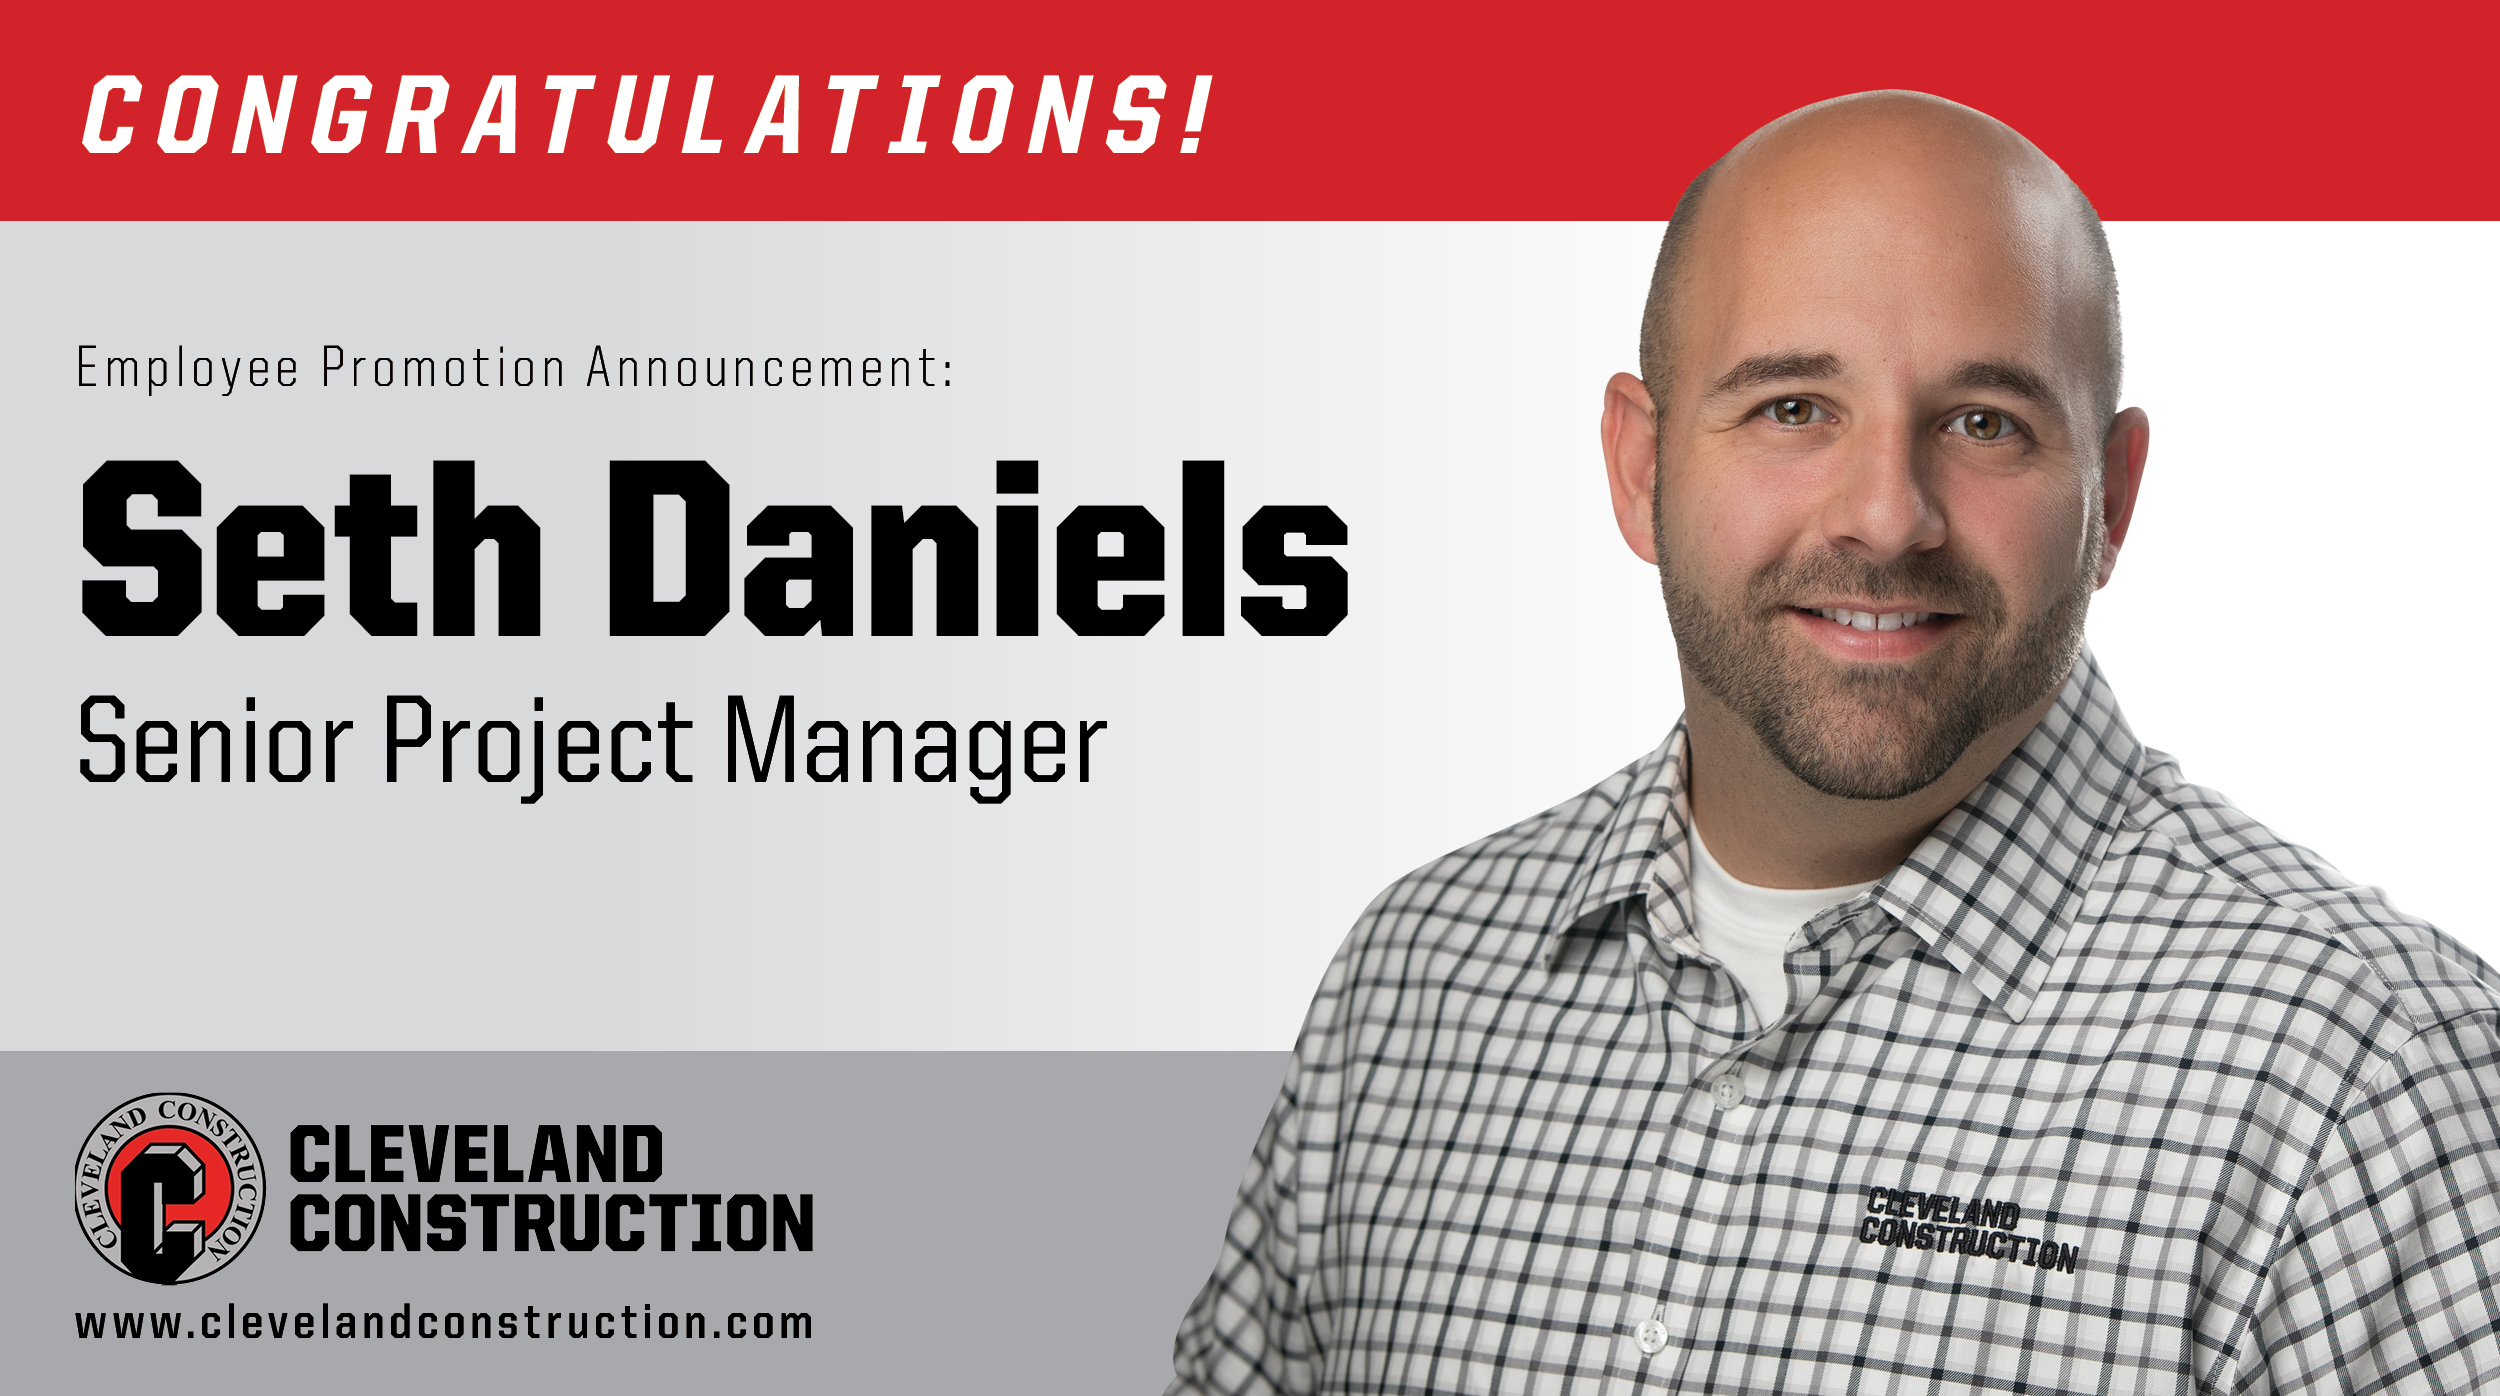 Seth Daniels Promoted to Senior Project Manager